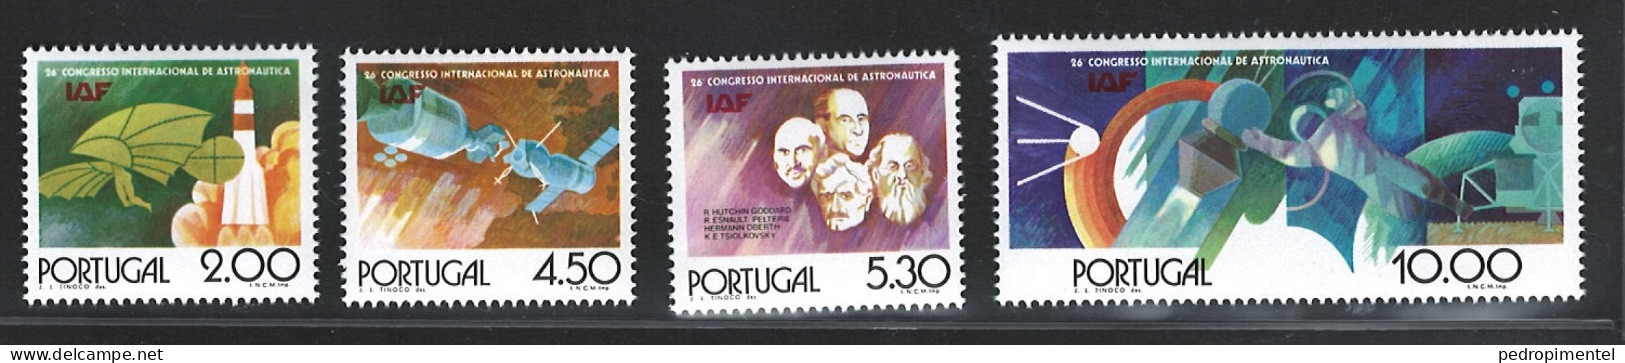 Portugal Stamps 1975 "International Astronautical Federation" Condition MNH #1261-1264 - Neufs